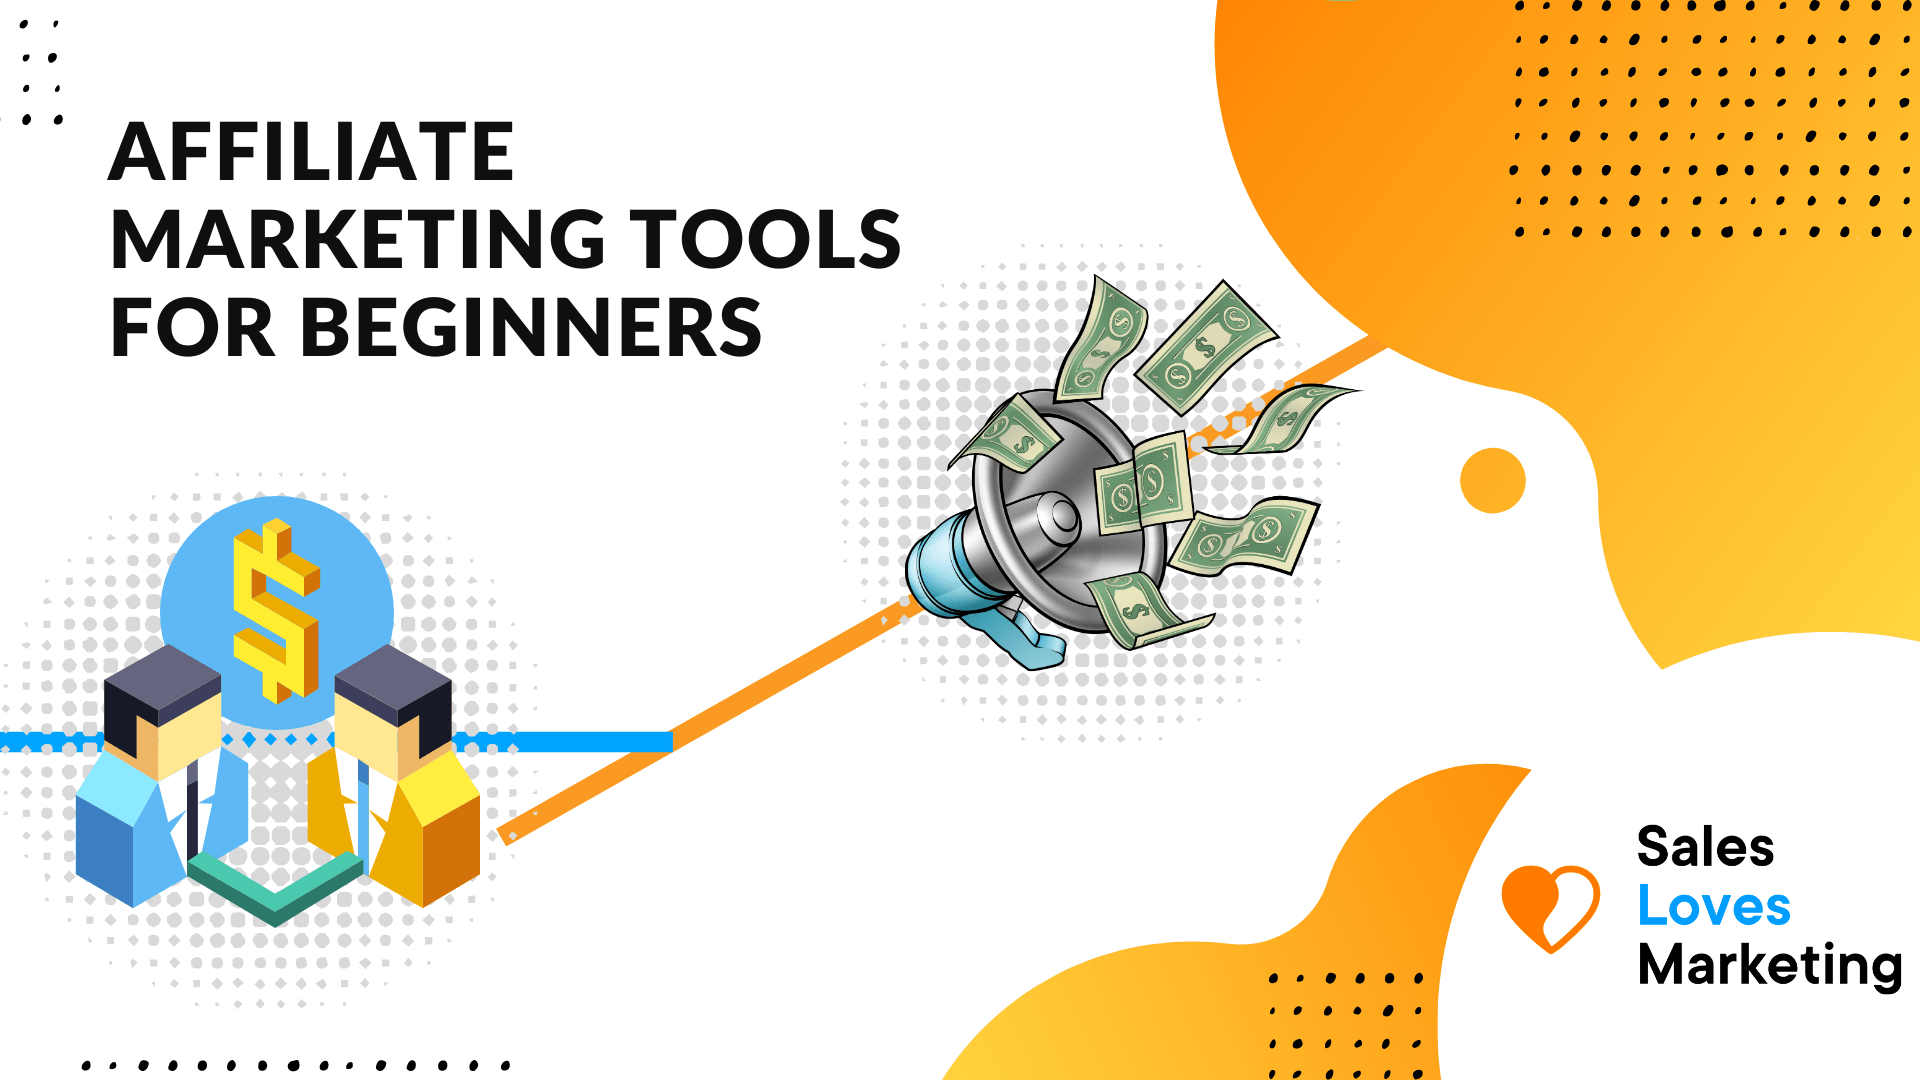 Top 10 Affiliate Marketing Tools for Beginners